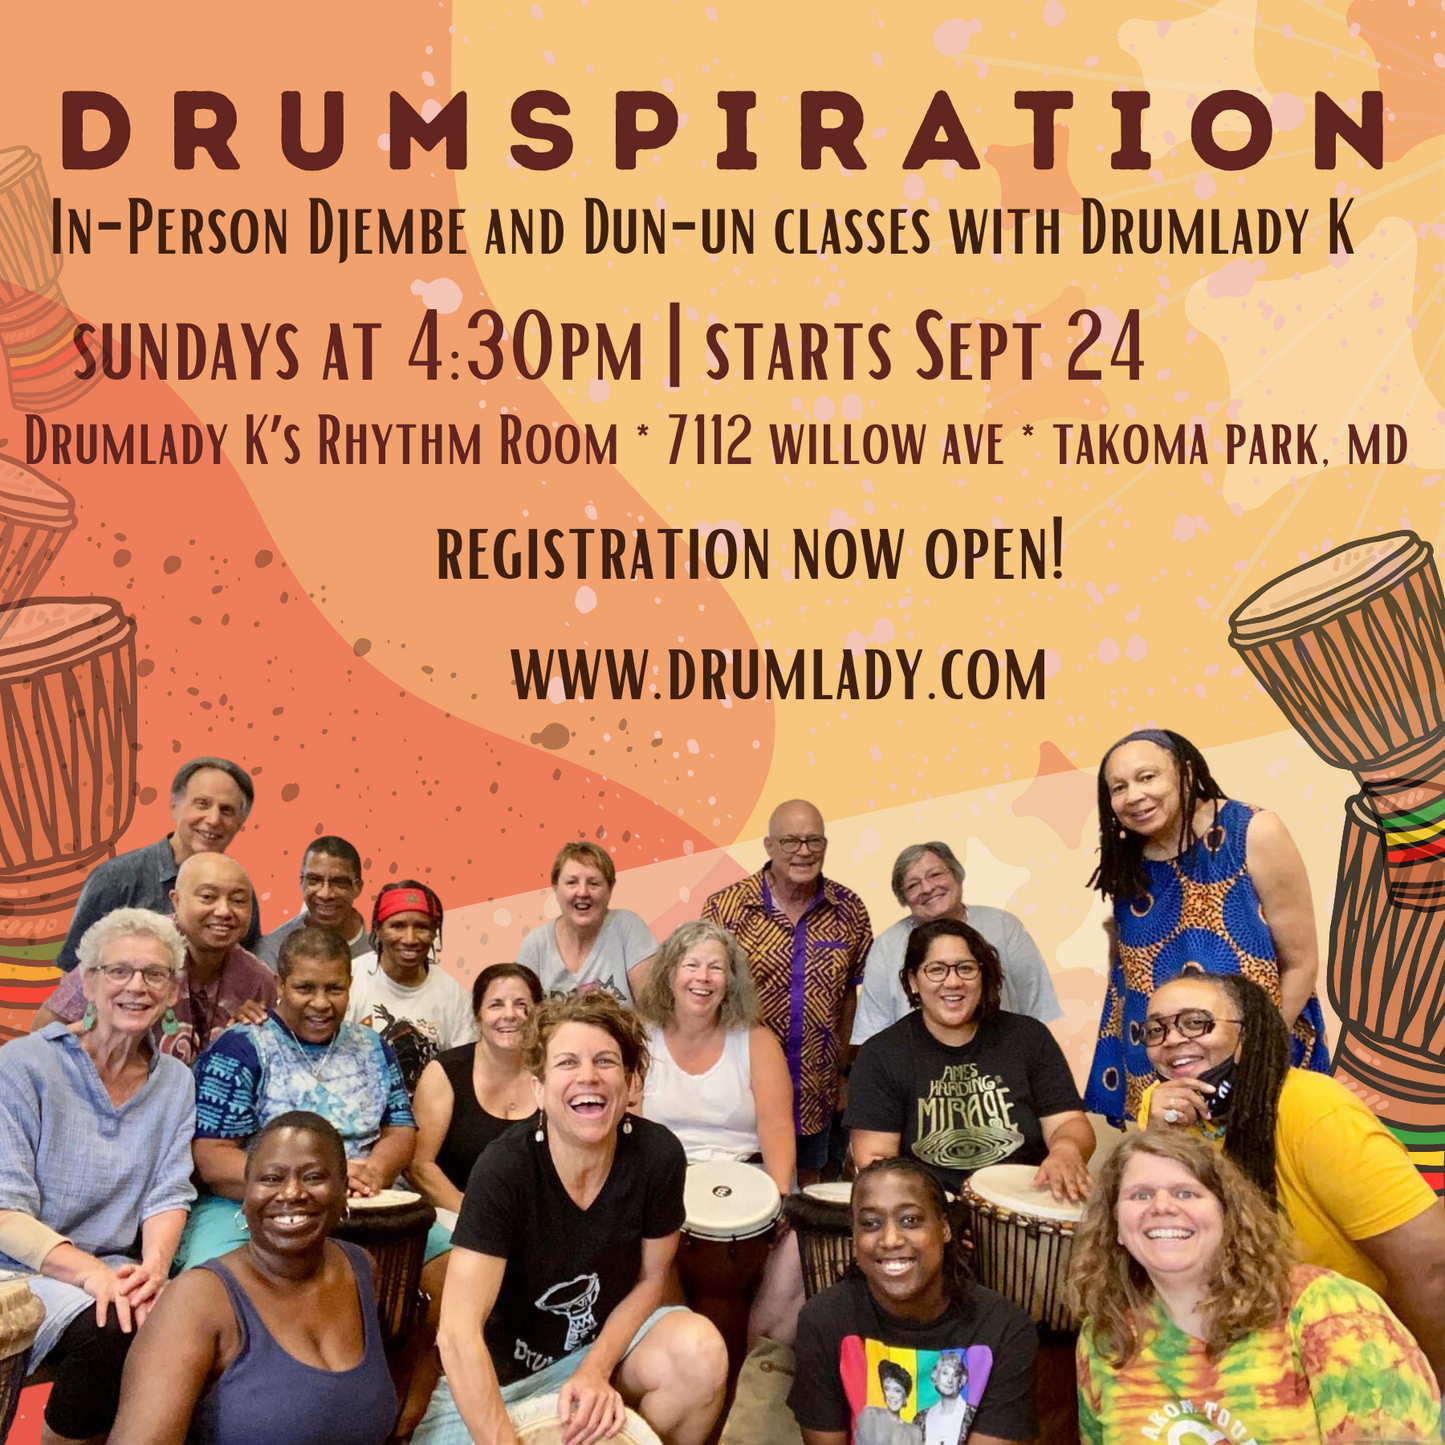 Drumspiration 6 week session - Drum Classes in person - starts Sept. 24